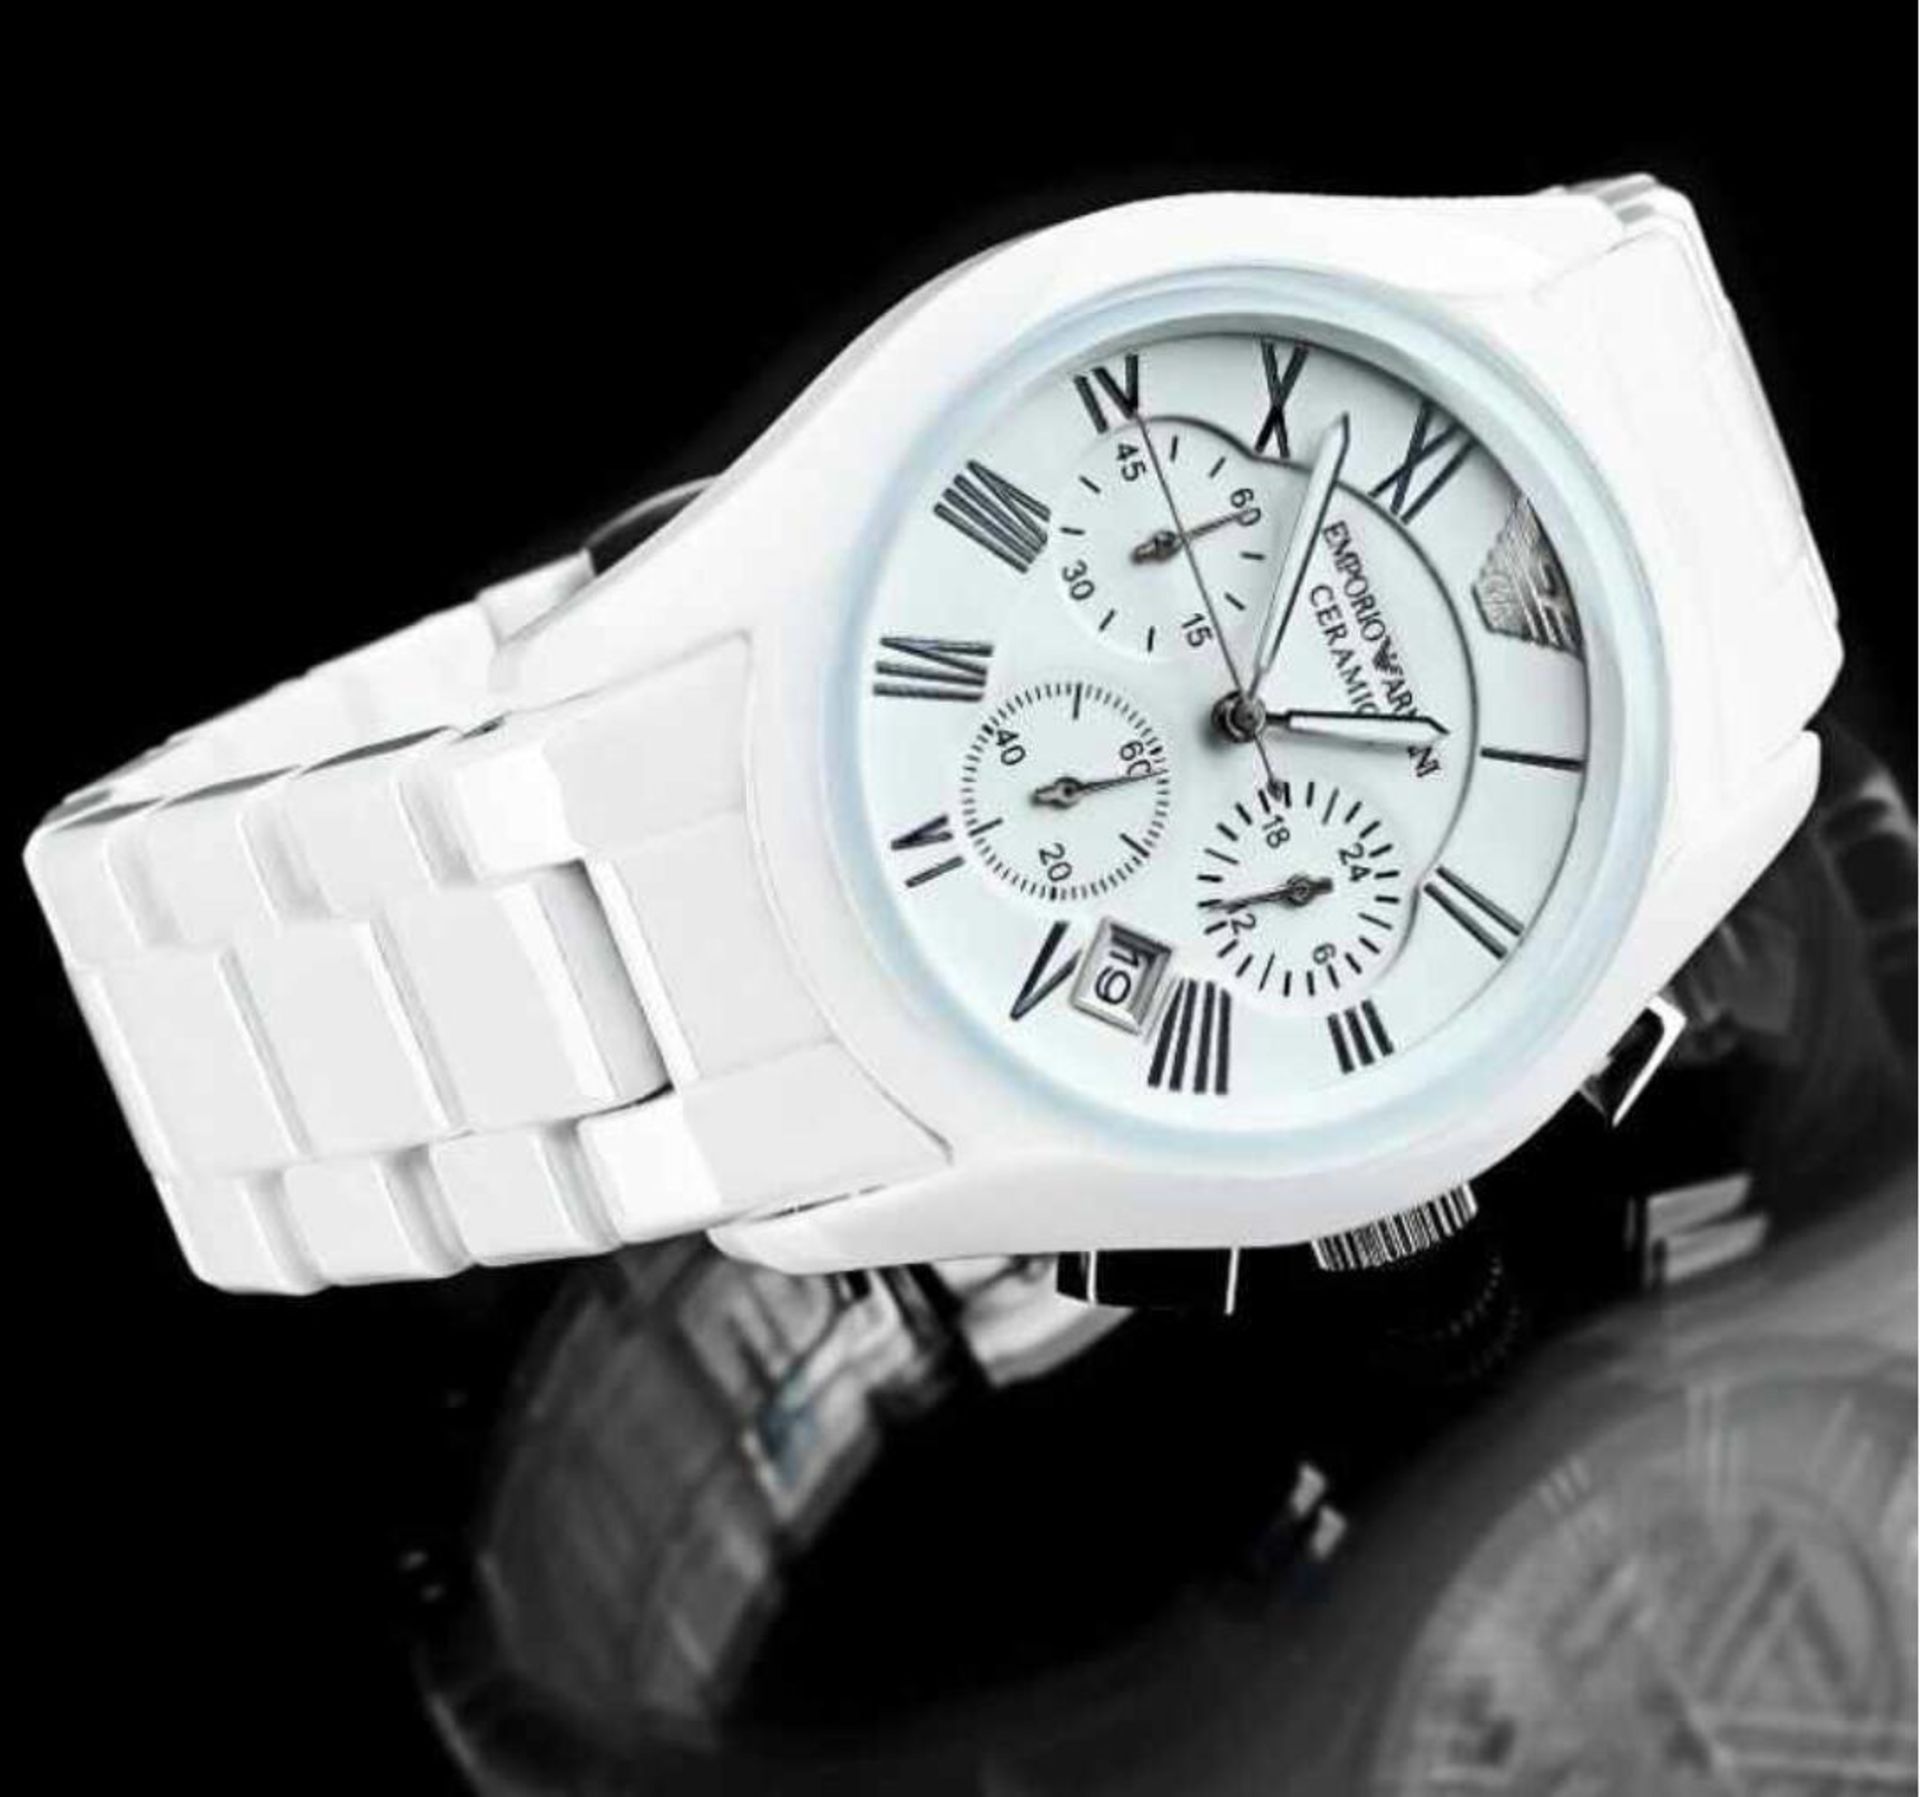 BRAND NEW GENTS EMPORIO ARMANI, AR1403, WHITE CERAMICA WATCH, COMPLETE WITH ORIGINAL ARMANI WATCH - Image 2 of 2